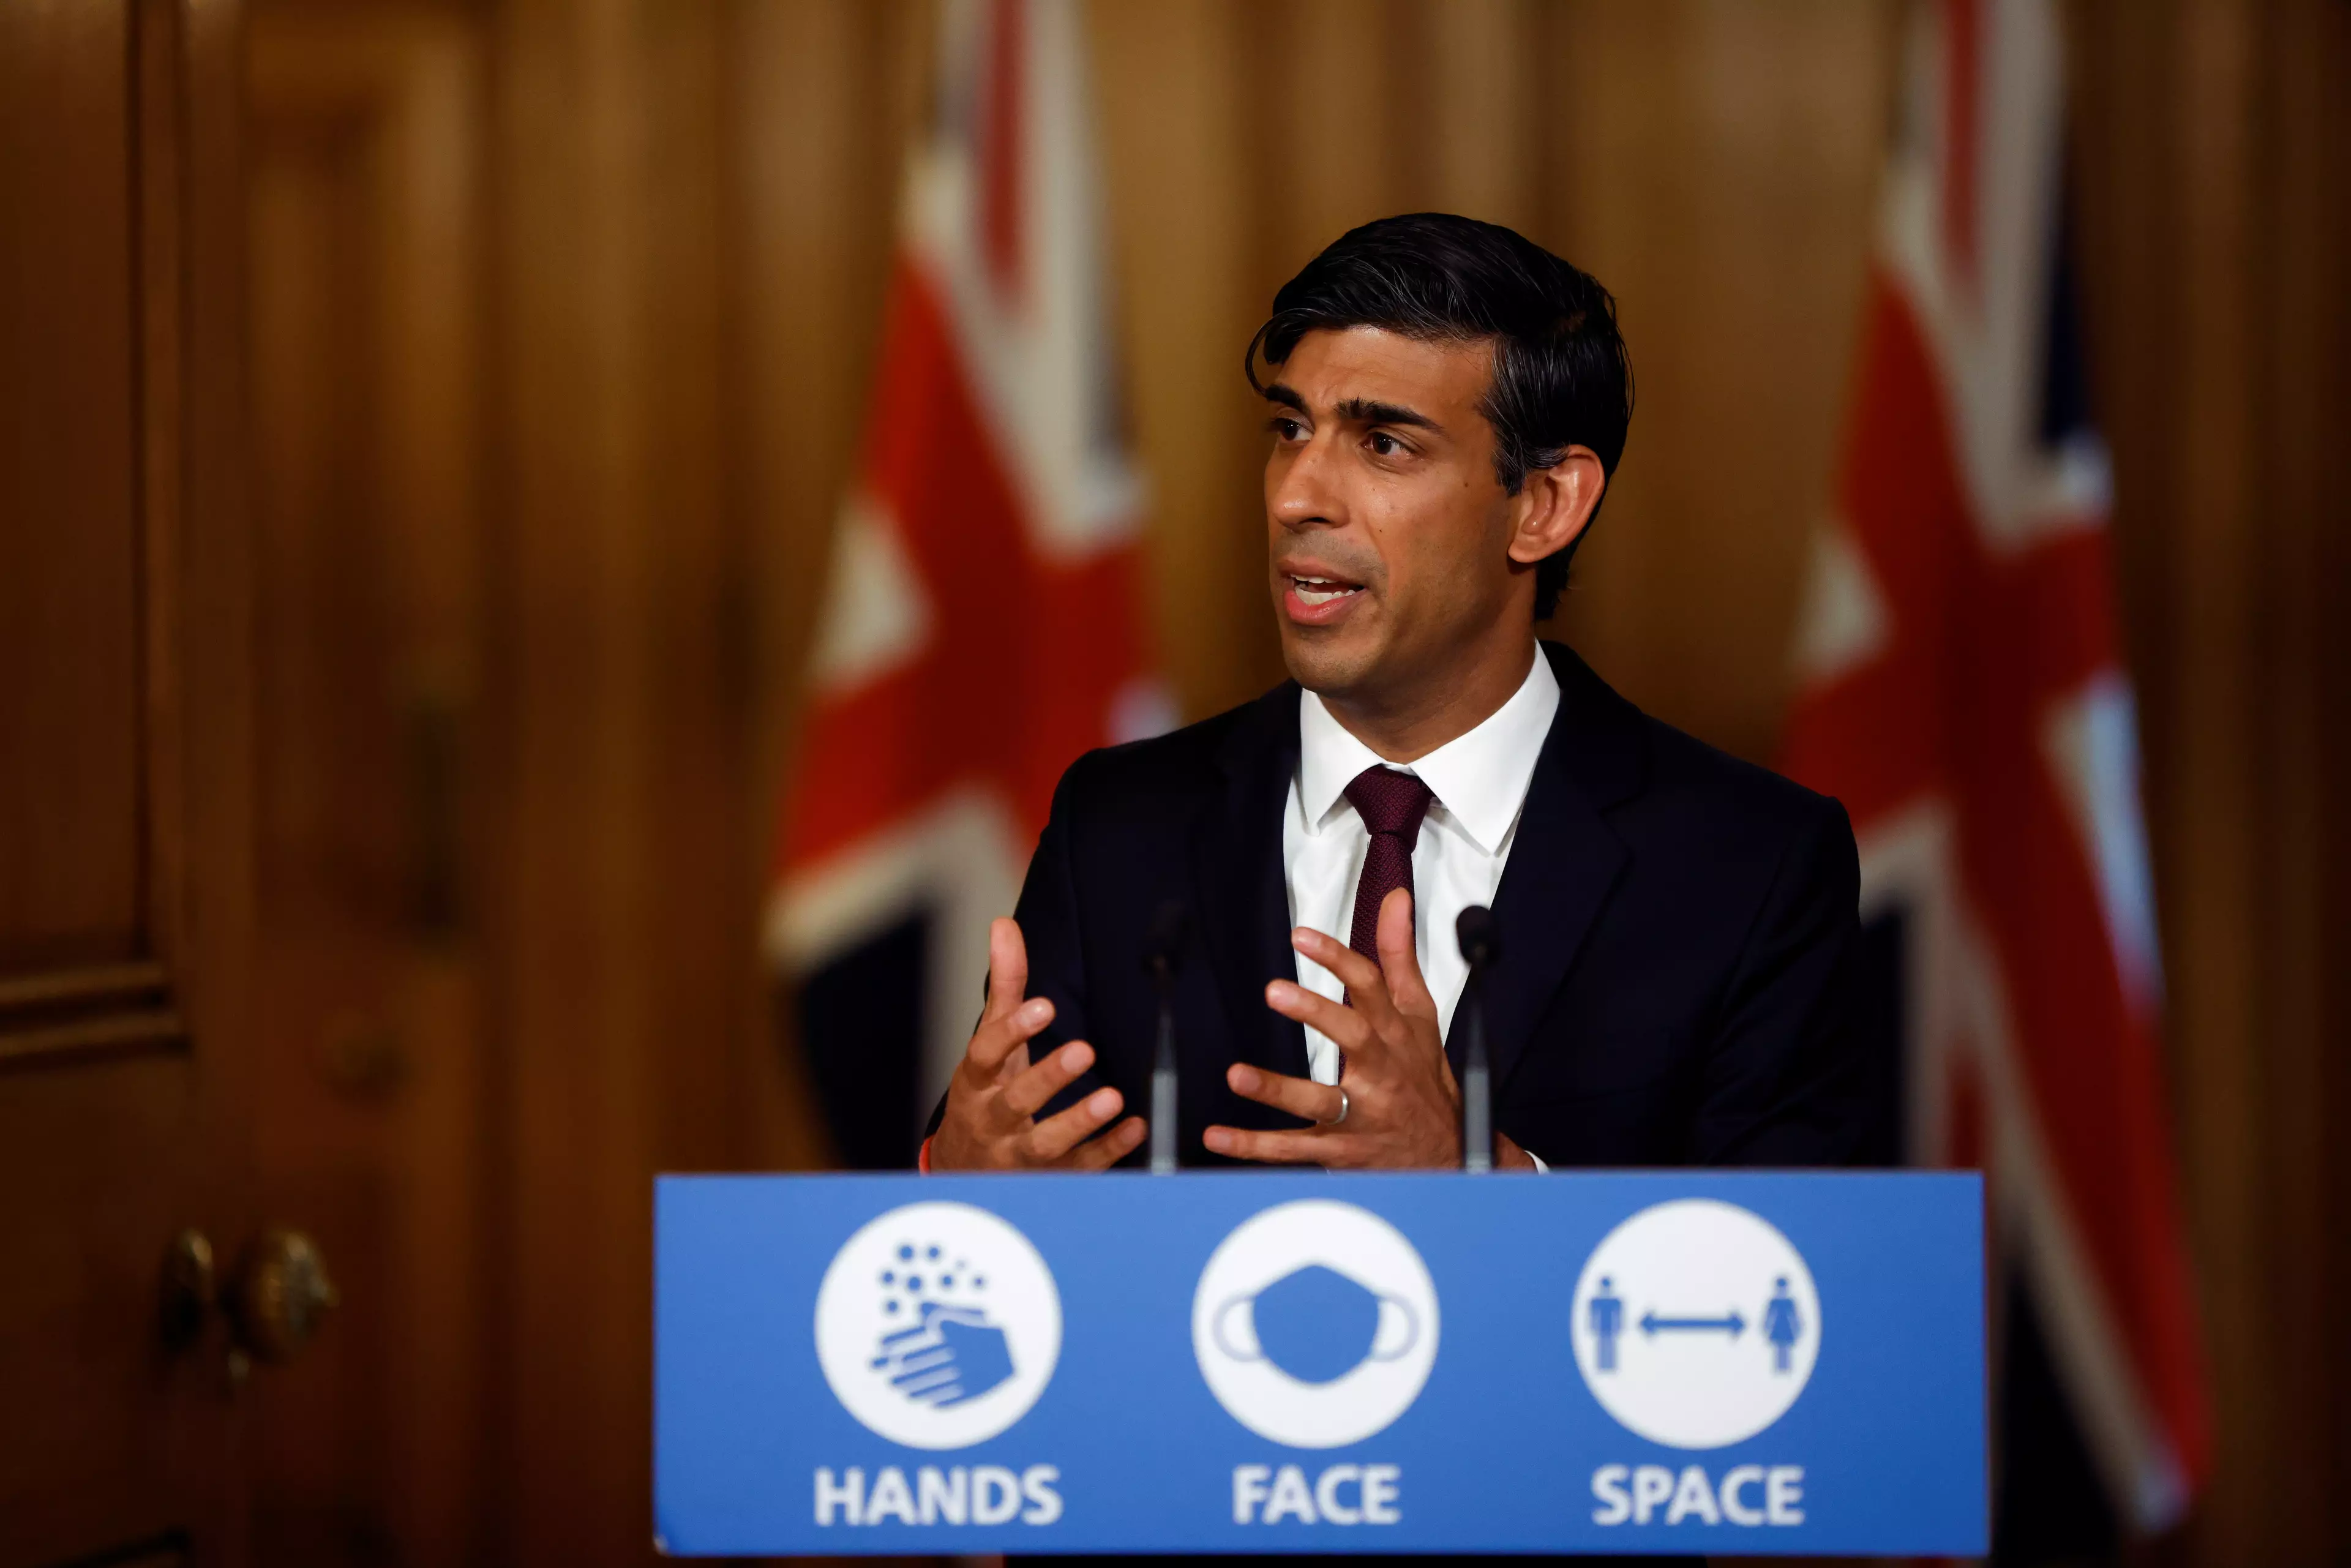 Rishi Sunak says the government will pay two thirds of each employee's salary, up to a maximum of £2,100 per month, for those places forced to shut (